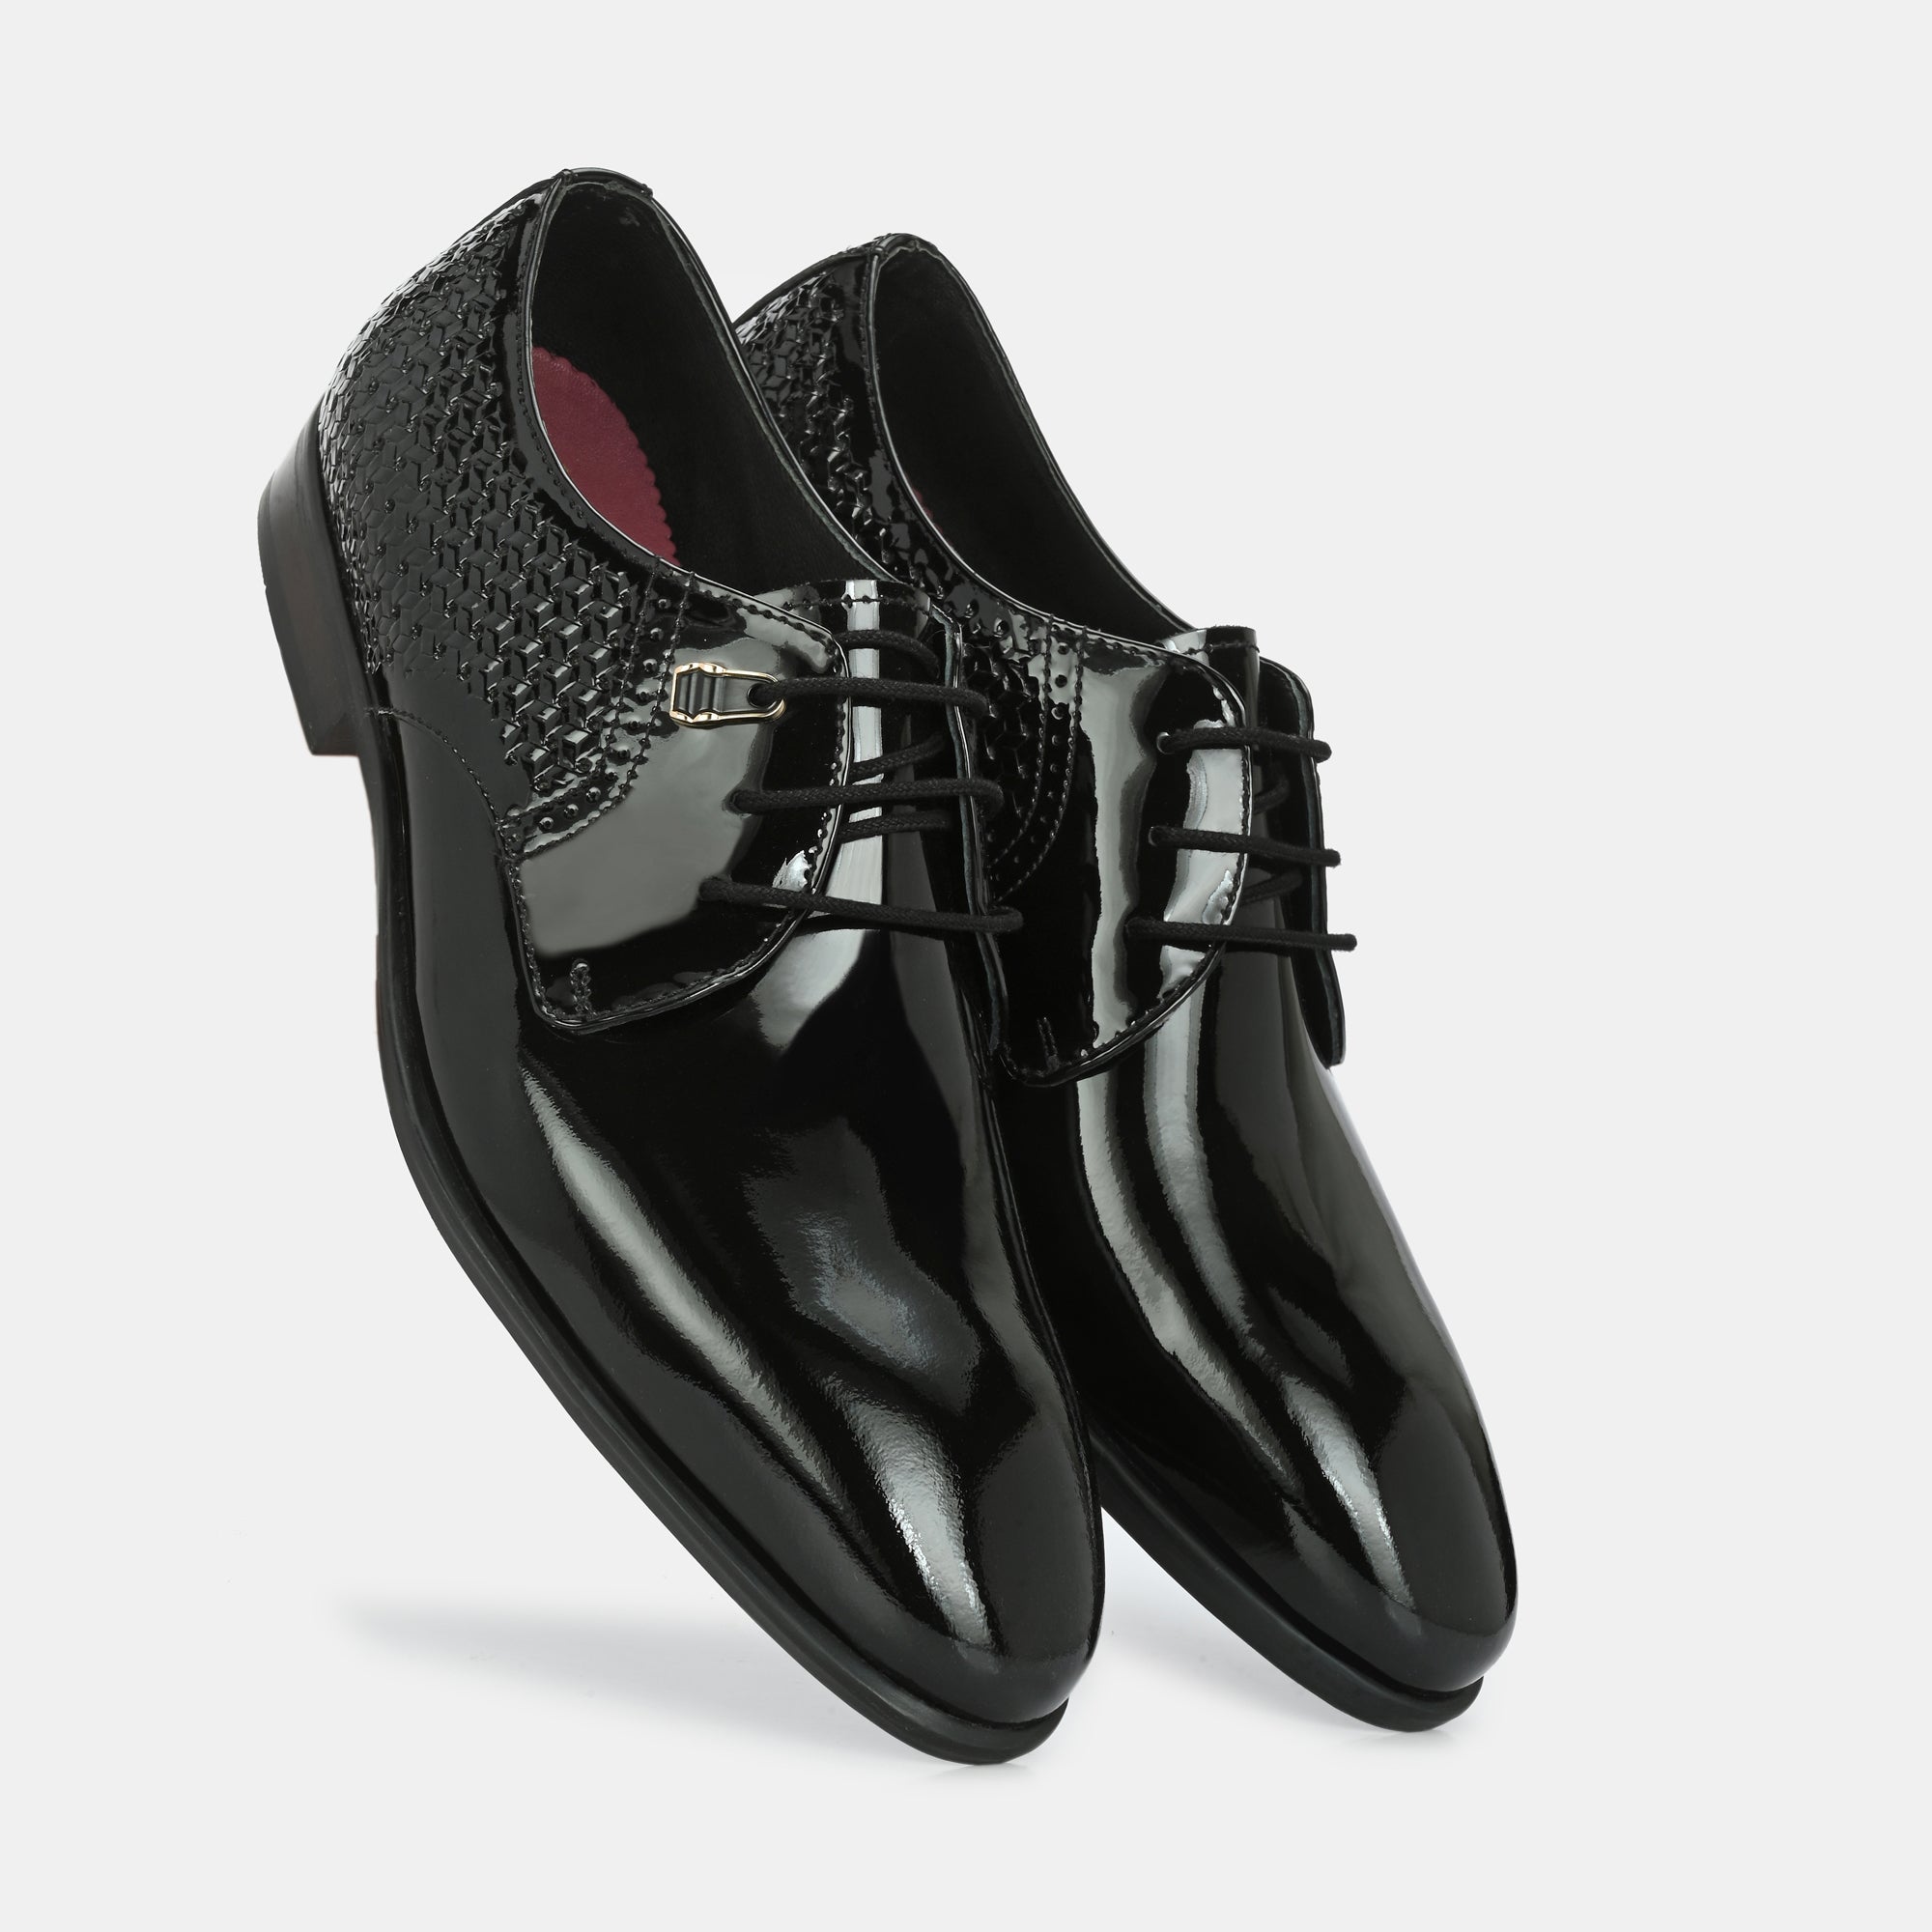 Patent Black Perforated Lace-Up Shoes by Lafattio – Egoss Shoes